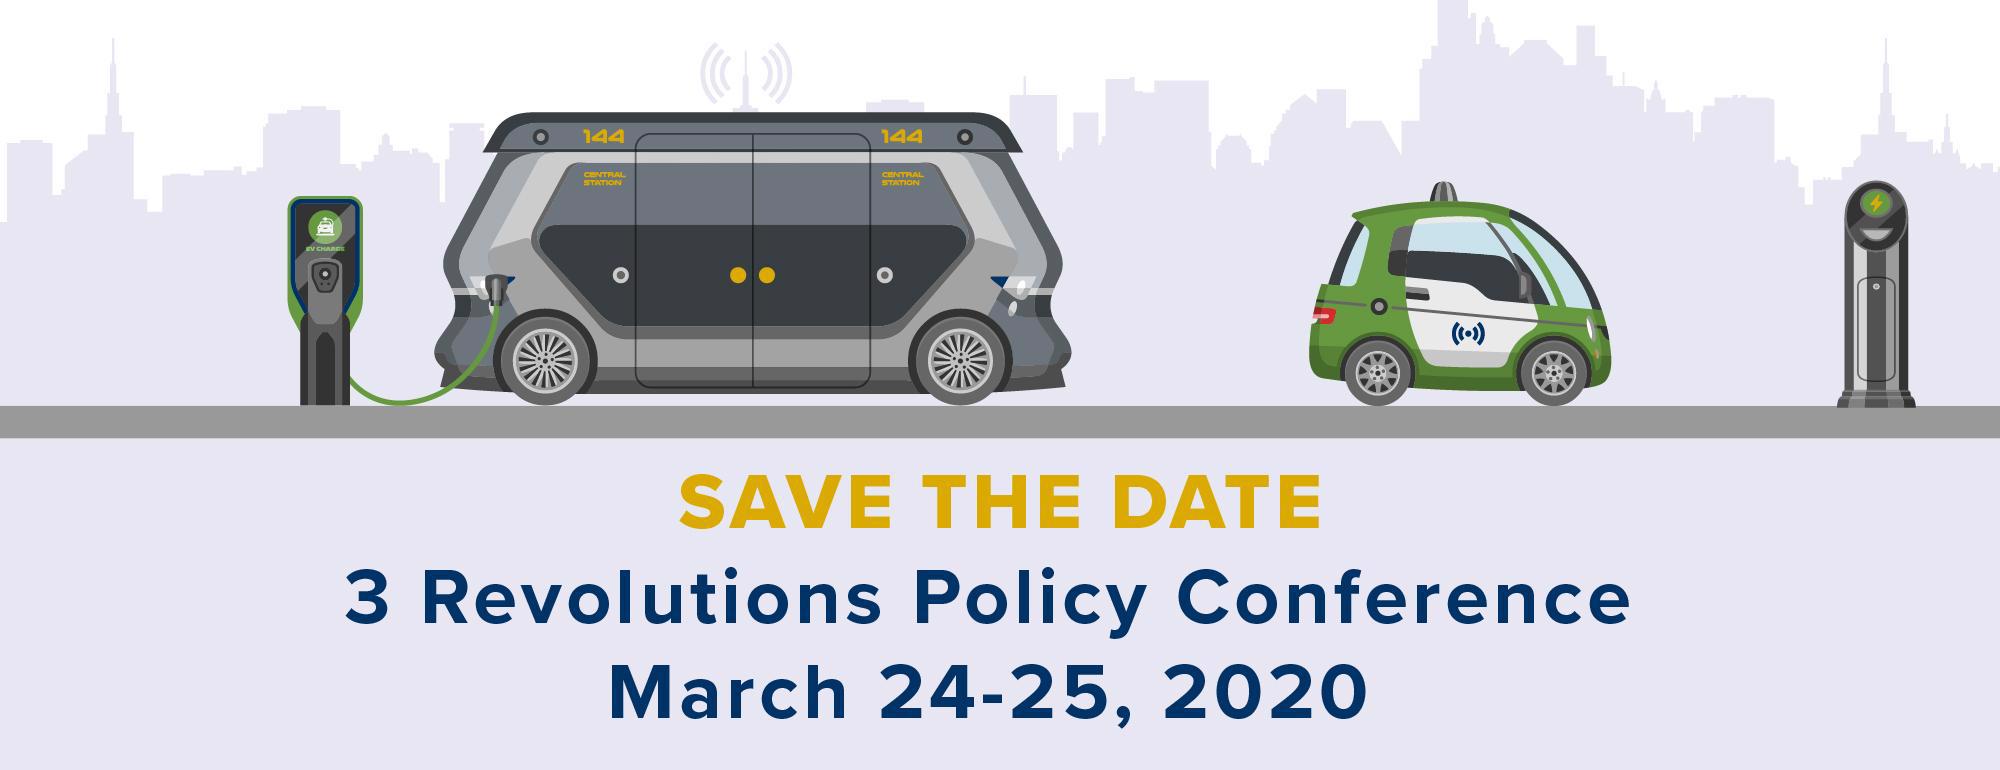 banner for 3 Revolutions Policy Conference save the date